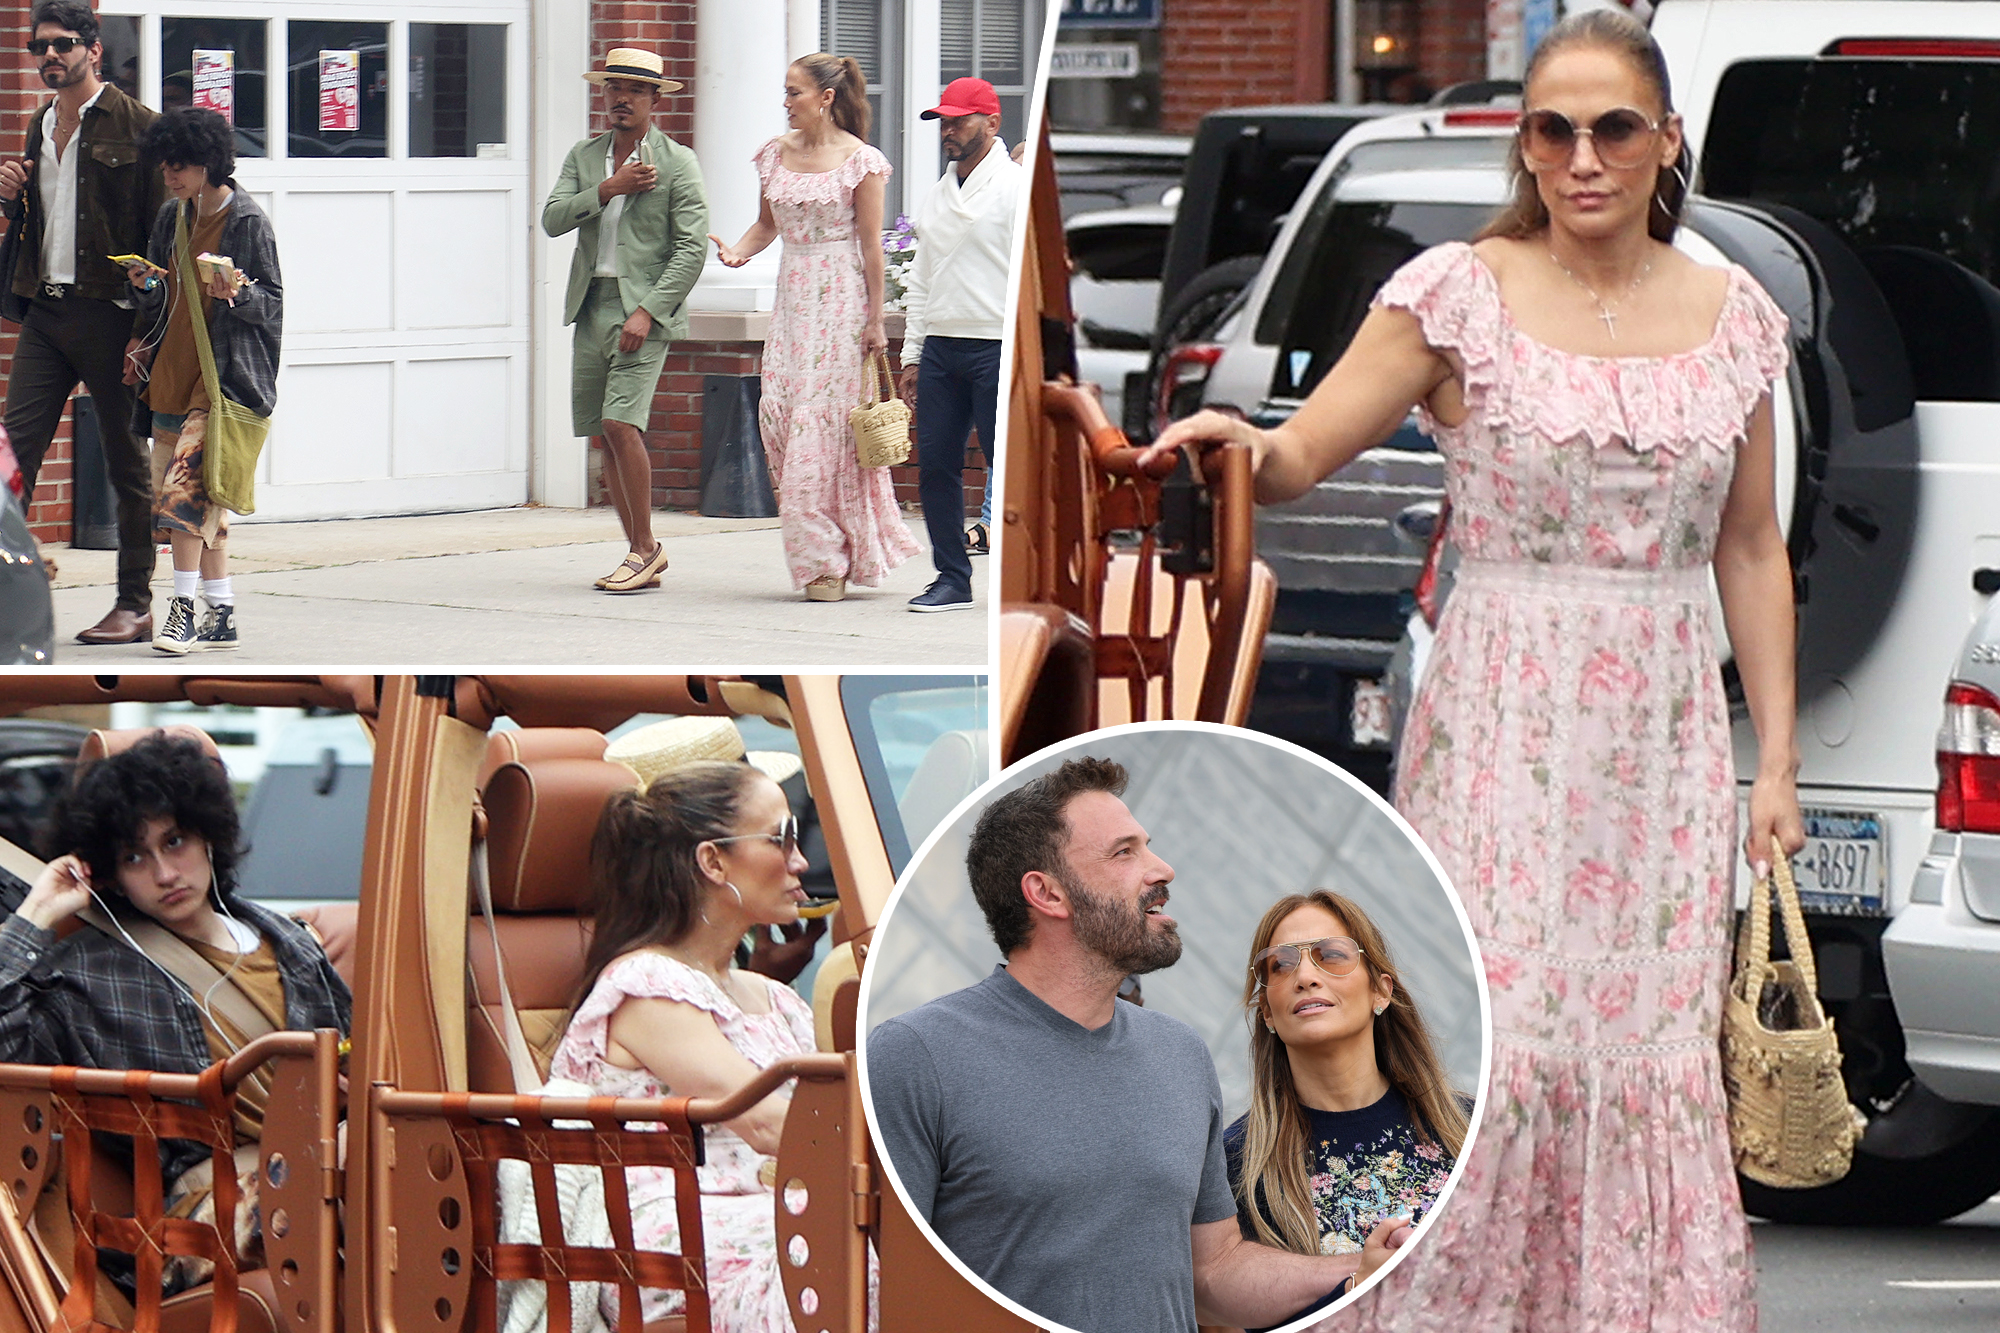 Jennifer Lopez's Hamptons Outing Sparks Speculation: What's Really Going On?